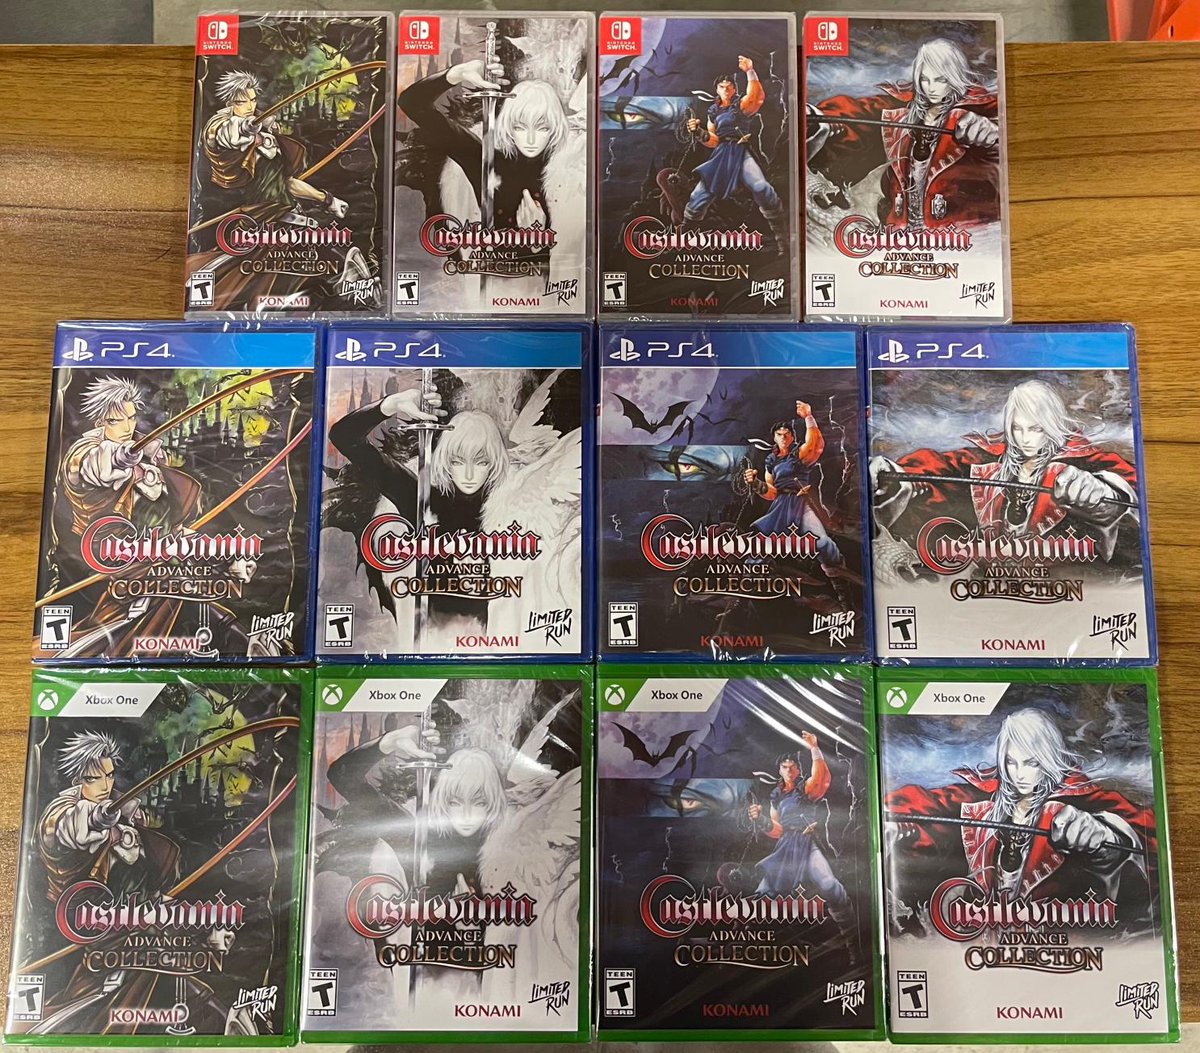 🚨Our last #giveaway this week! 🚨 RT this post and follow #VGP for a chance to win four copies, one of each variant of the #Castlevania Advance Collection! Winner's choice #NSW, #XboxSeriesX or #PS4 The winner chosen Monday, April 15th at 11 a.m. EST